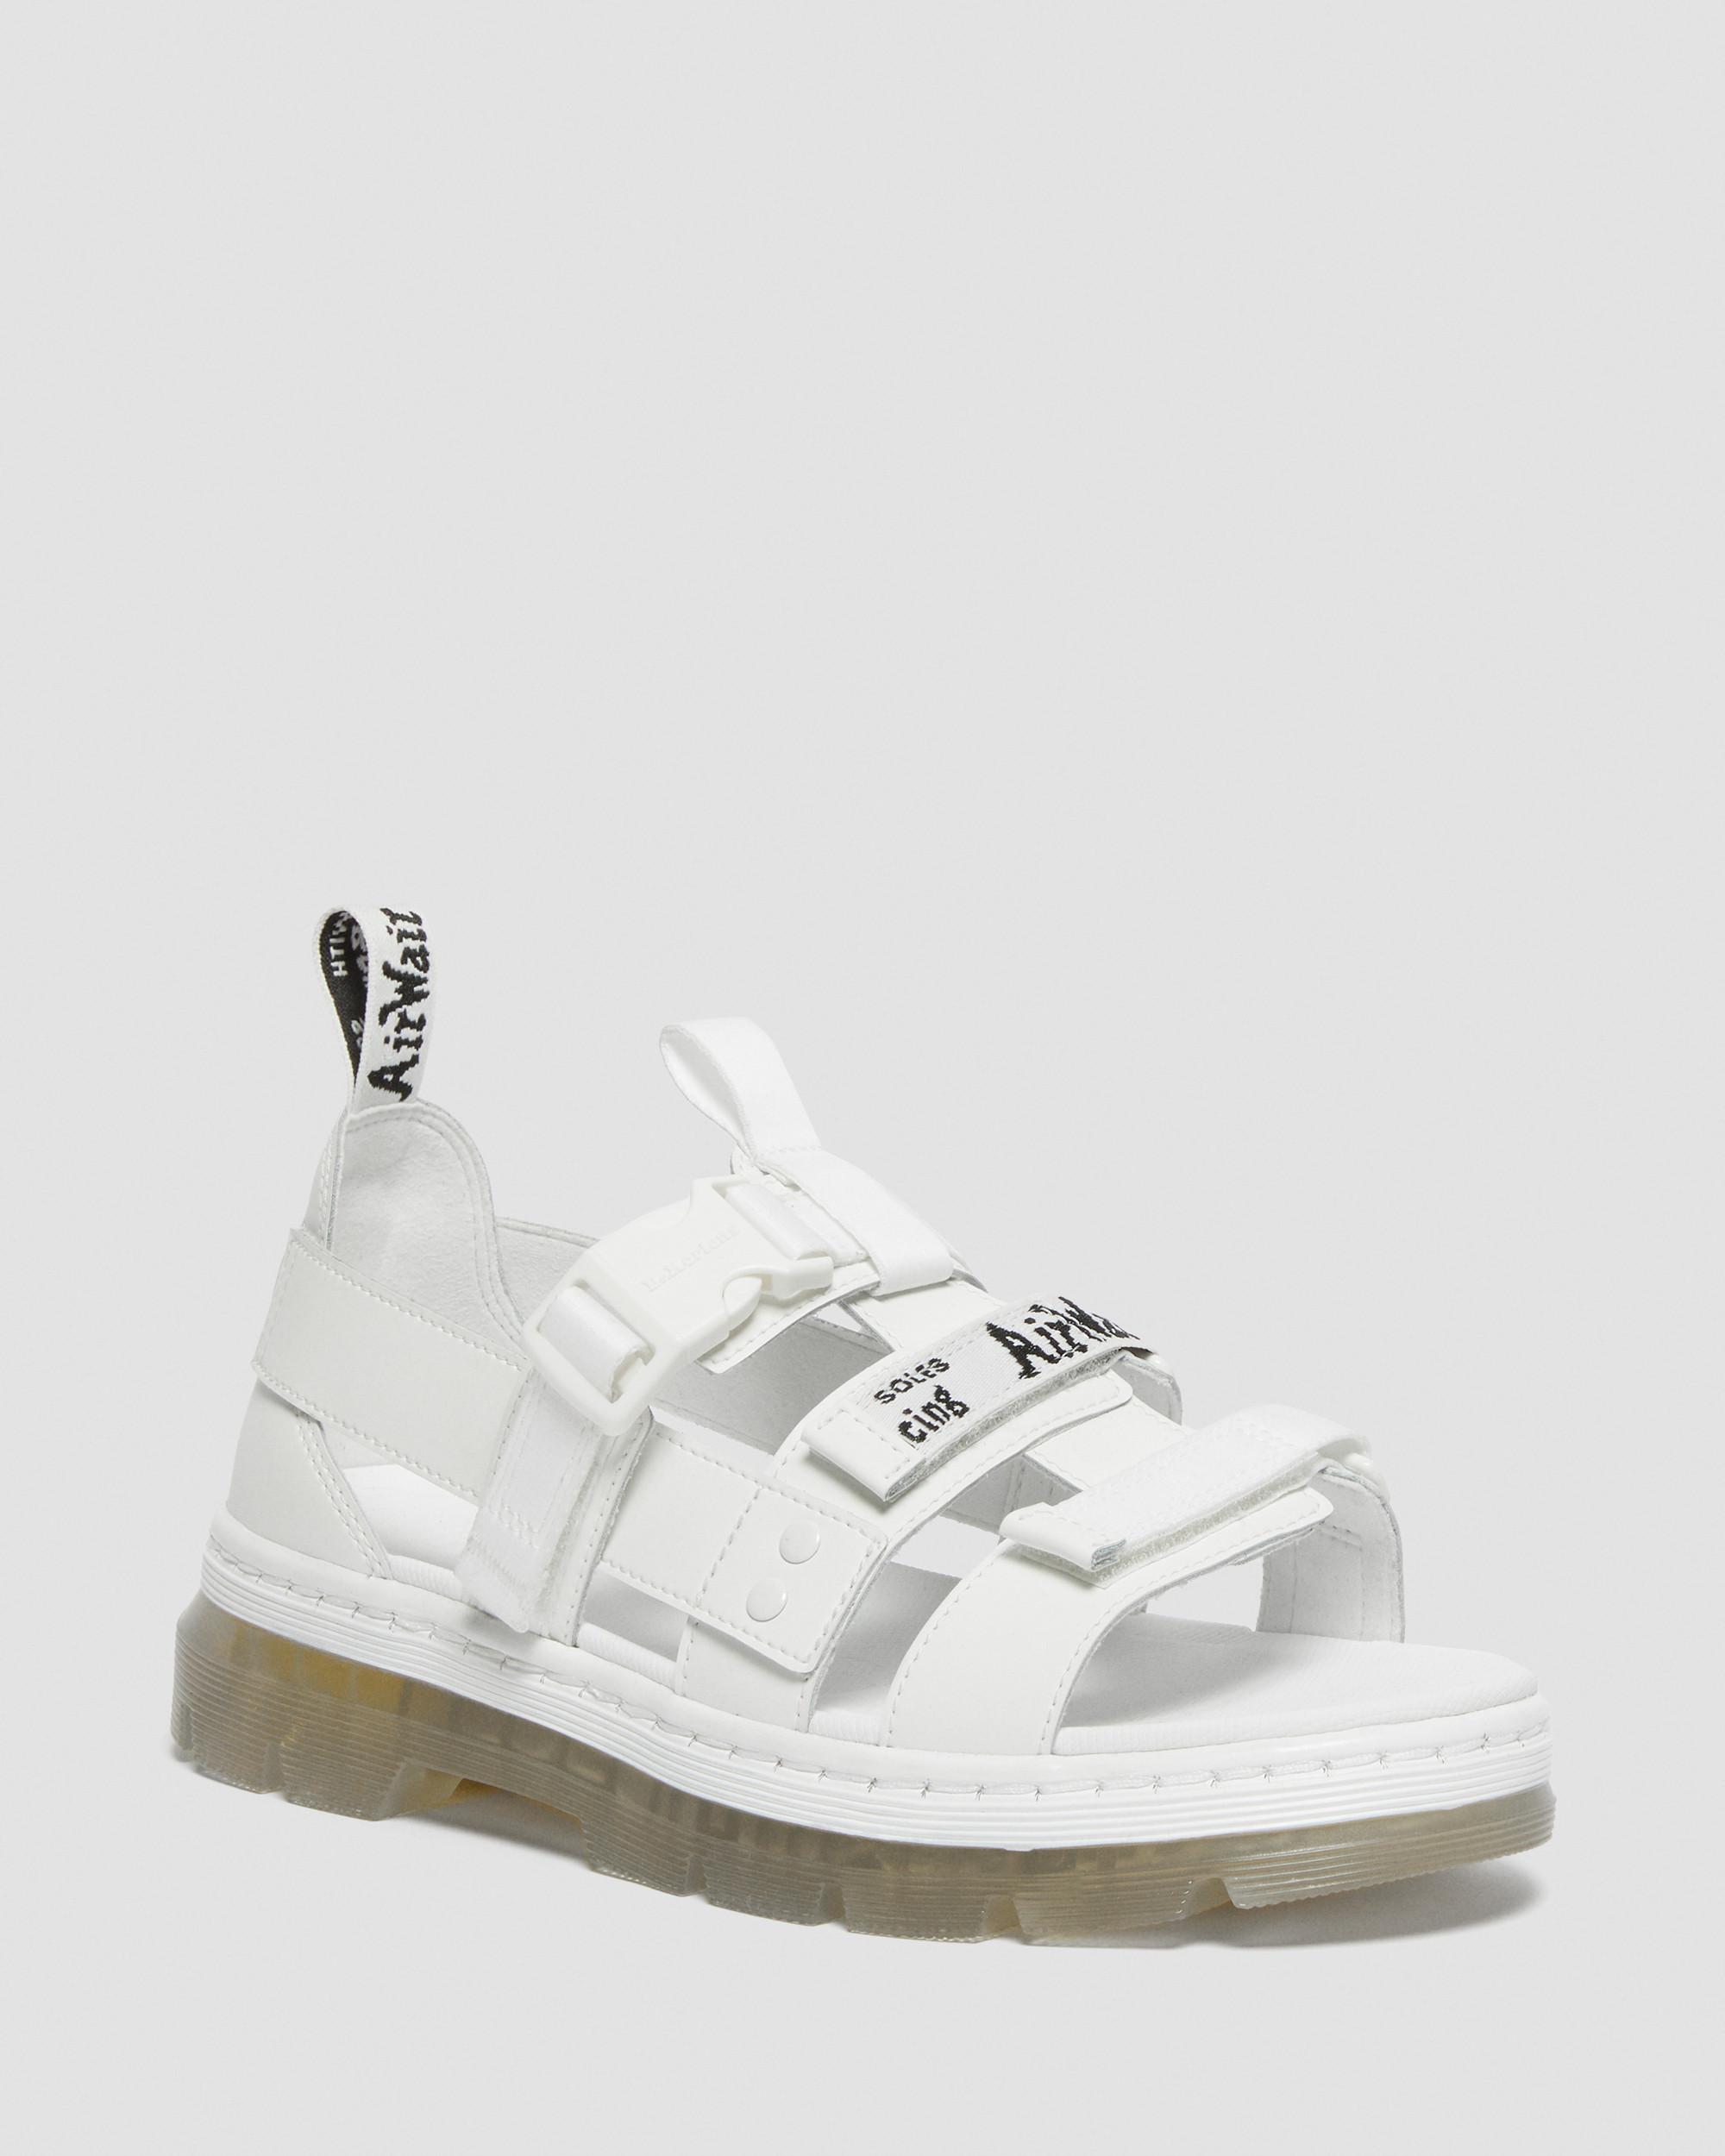 Pearson Iced Webbing Sandals in White